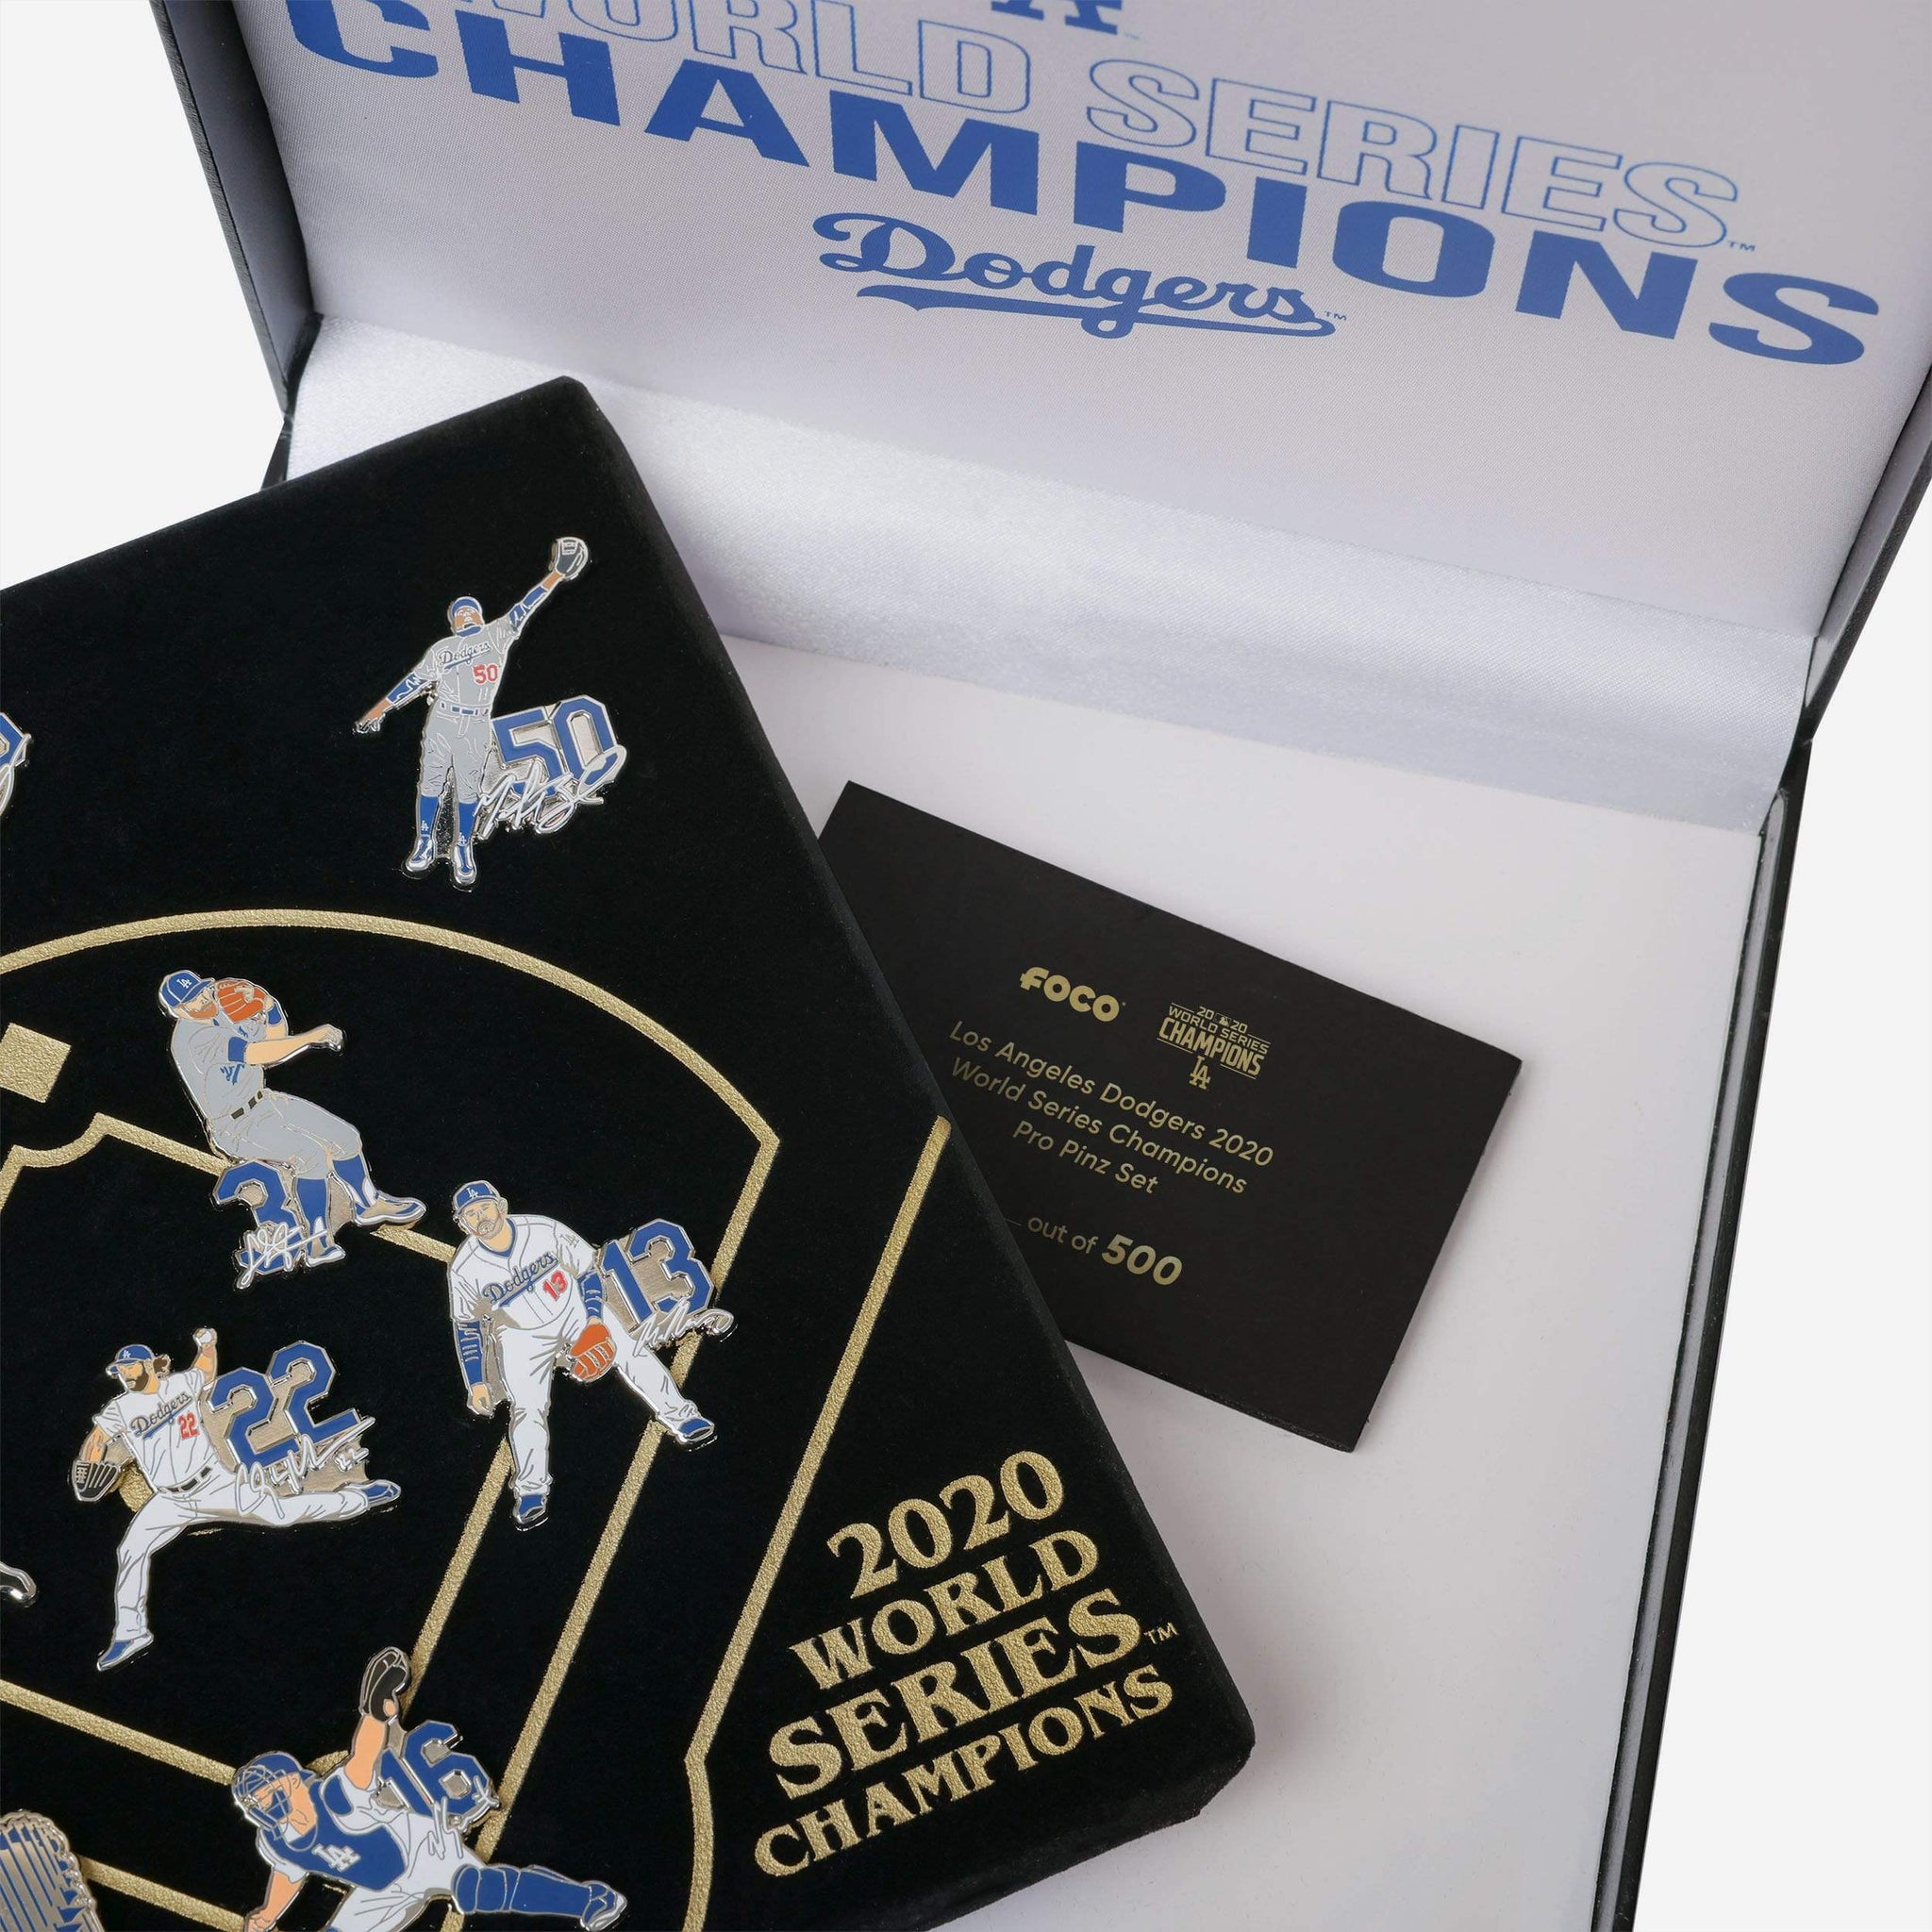 2020 World Series Champions Collector Pin - The Locker Room of Downey